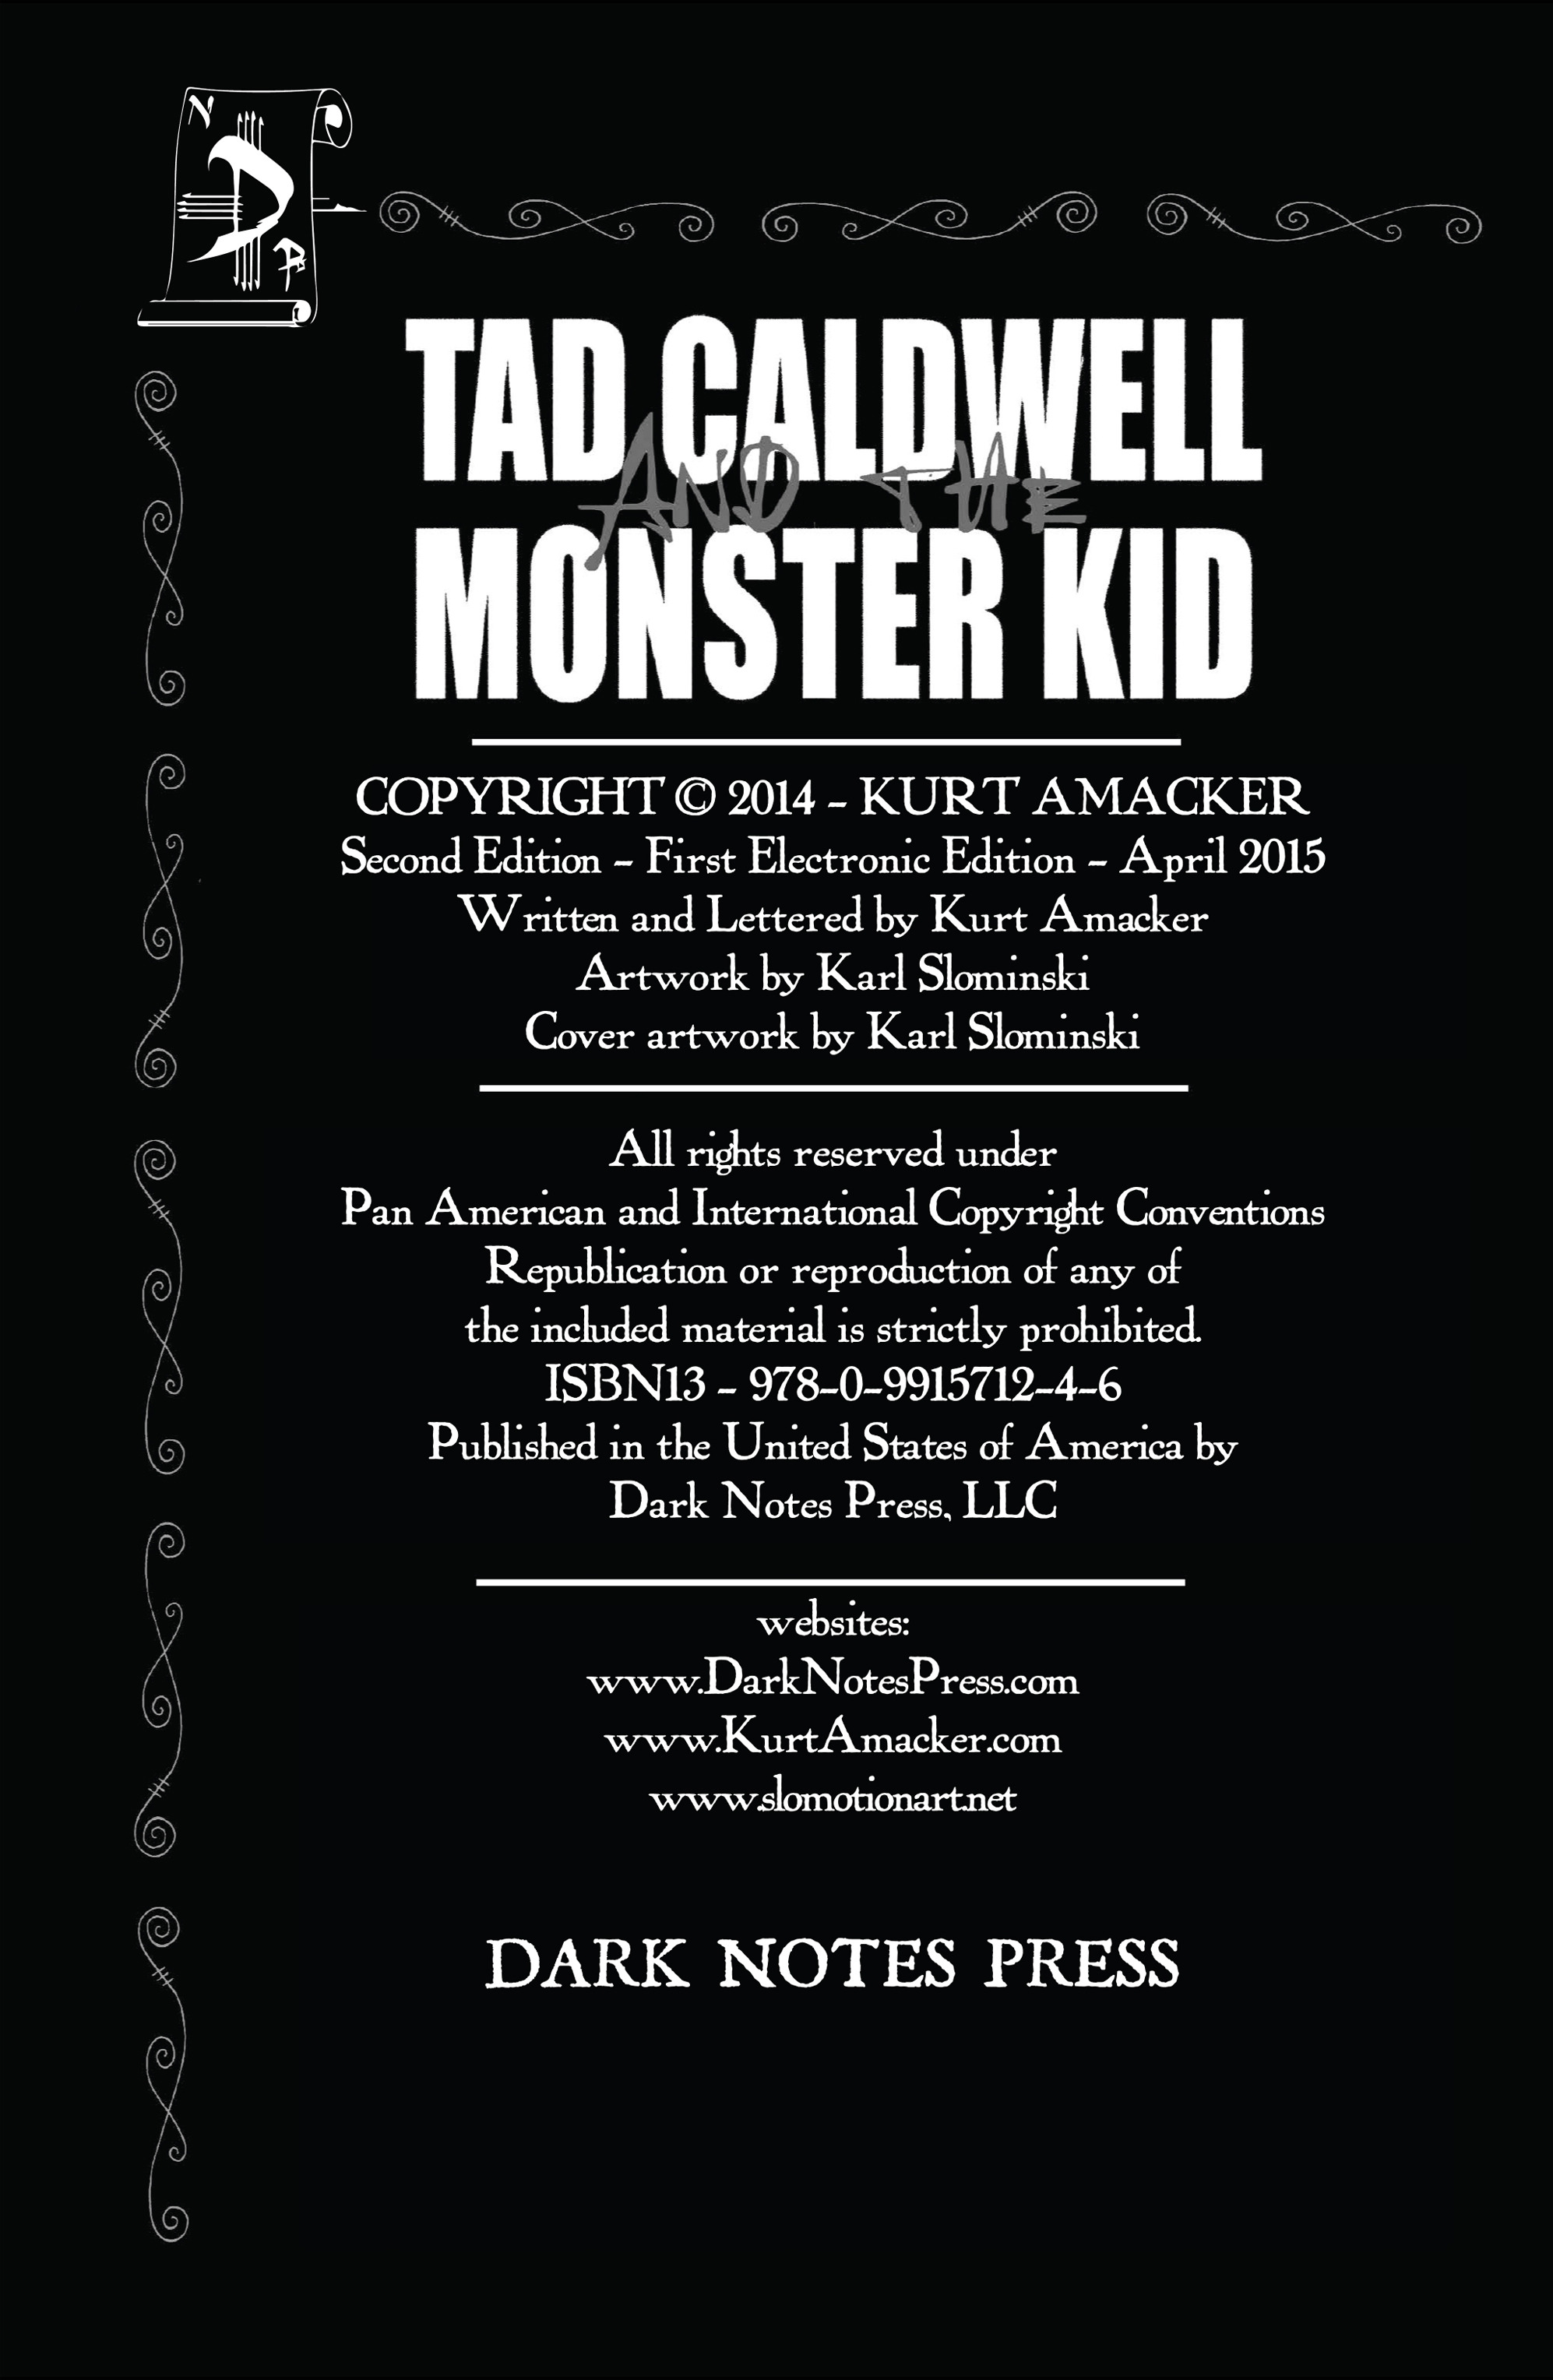 Read online Tad Caldwell and the Monster Kid comic -  Issue # TPB - 2